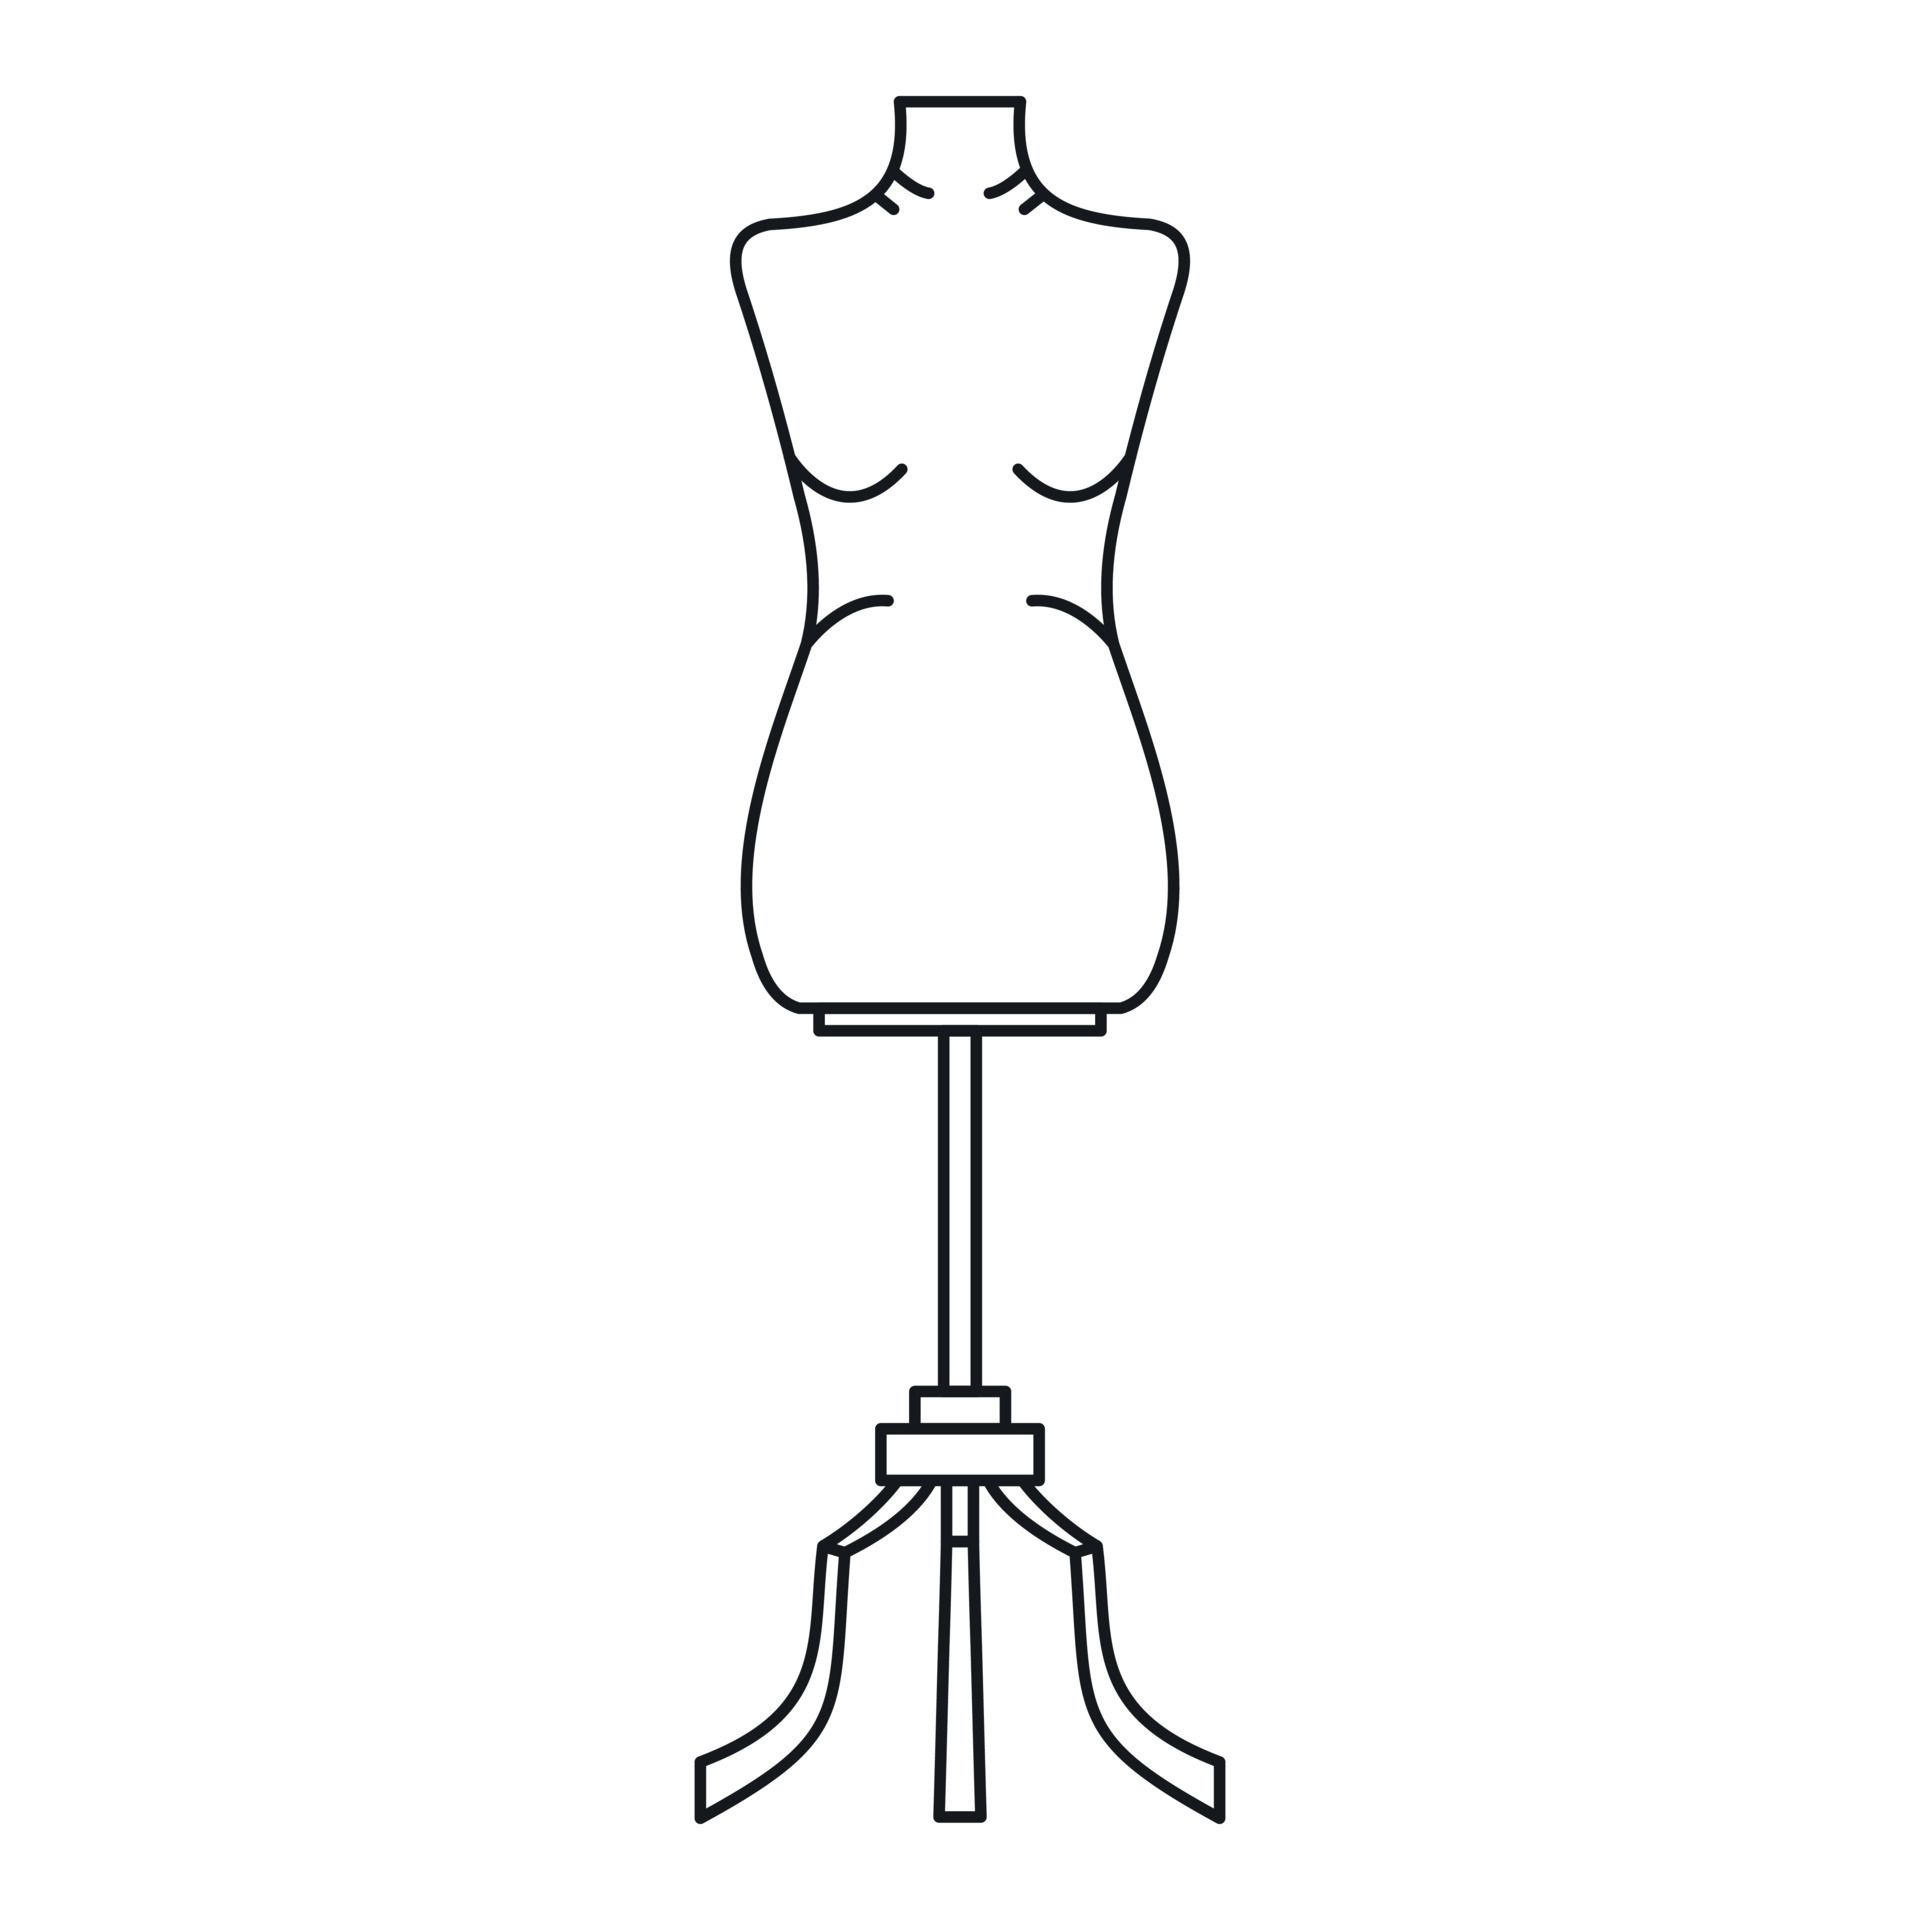 DIY Dress Form Sewing Patterns. Sewing Mannequins. Fitting